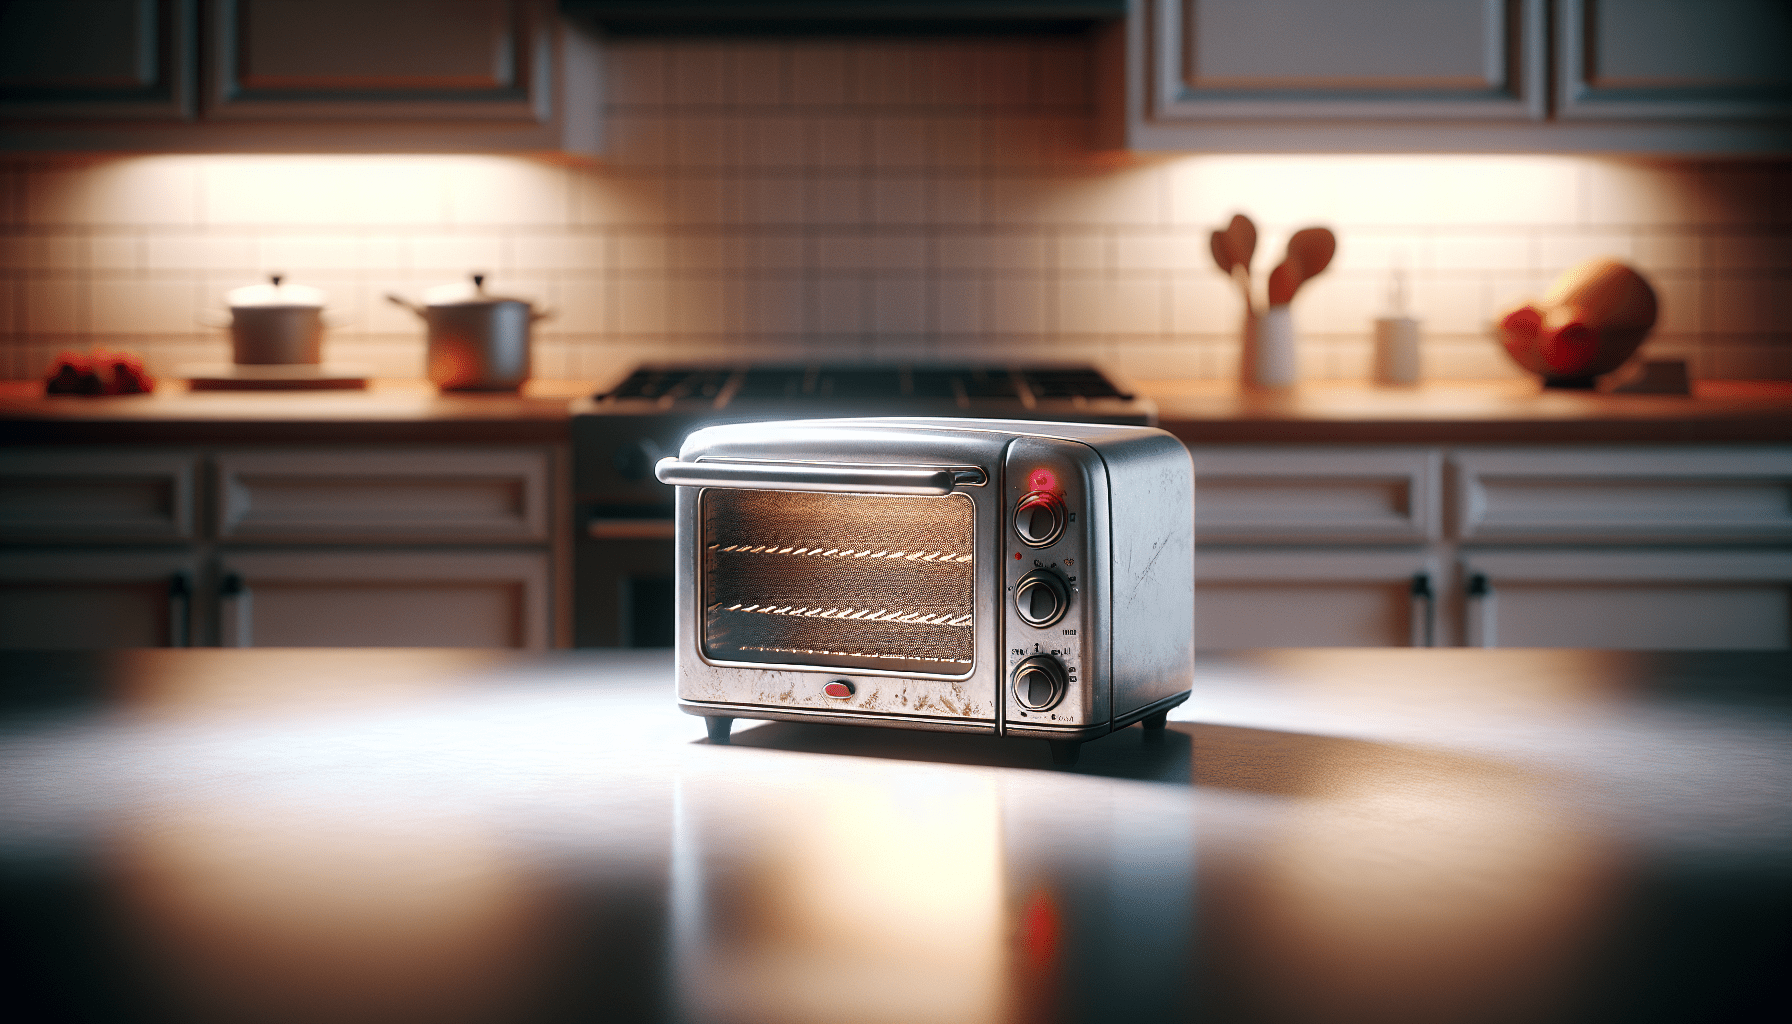 How Do I Get Rid Of An Old Toaster Oven?